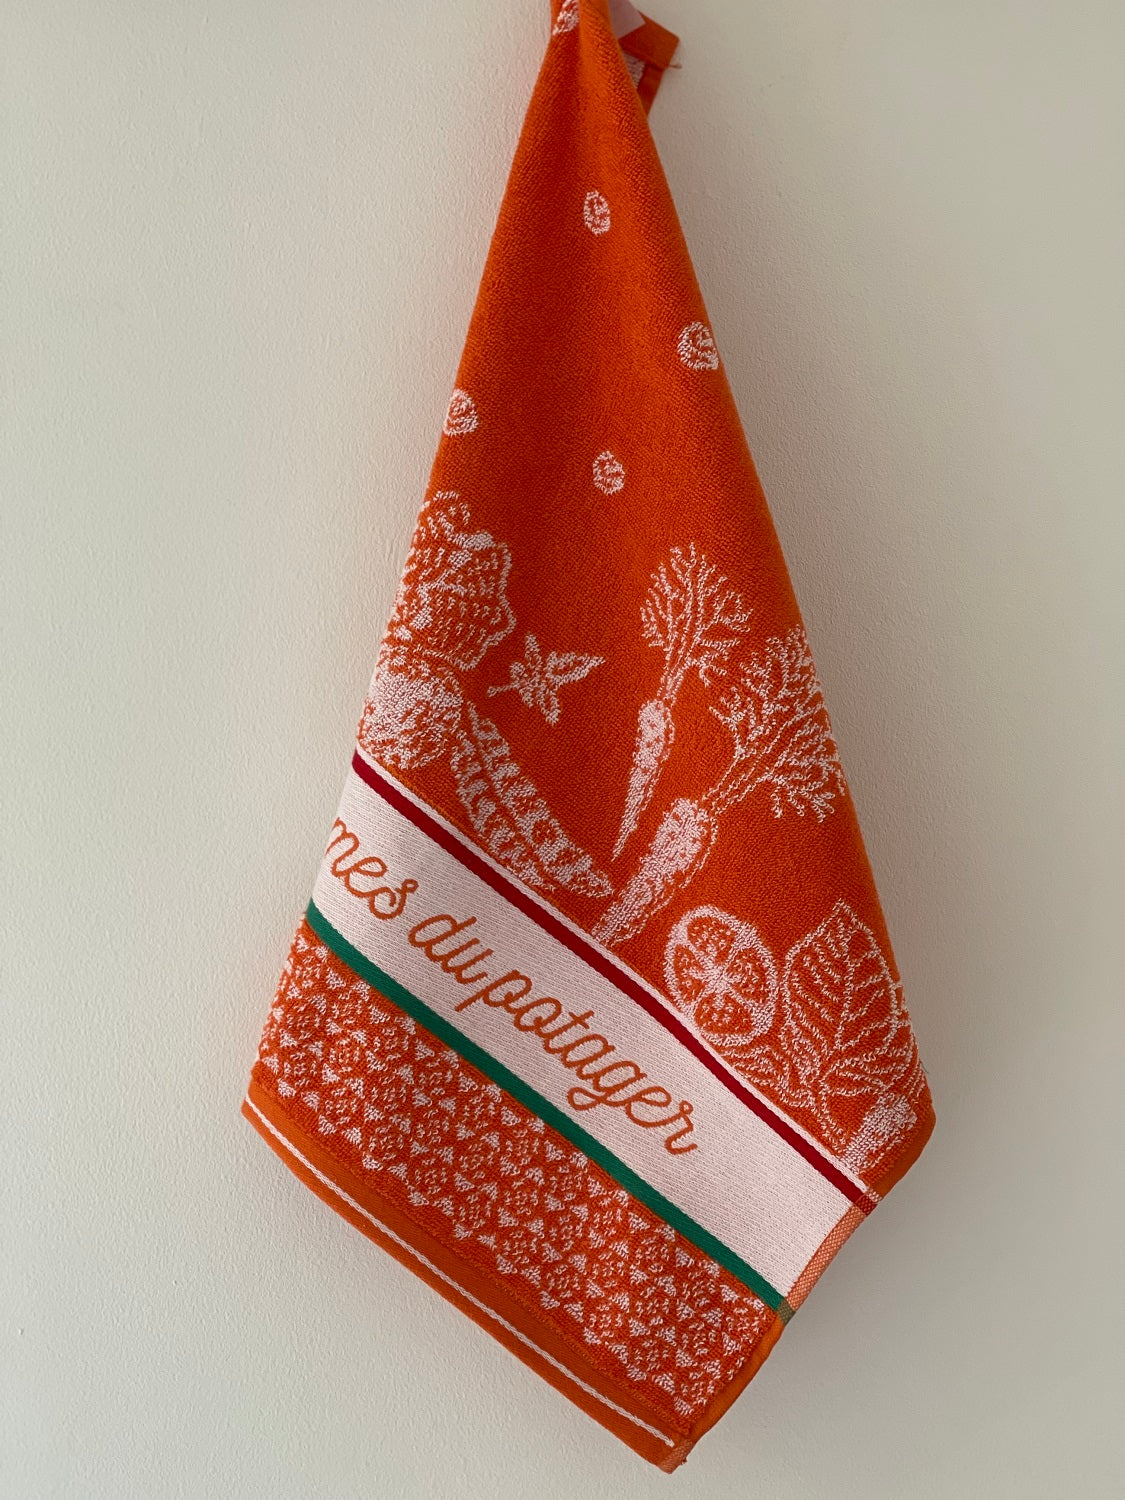 Coucke "Legumes du Potager", Cotton terry hand towel. Designed in France.